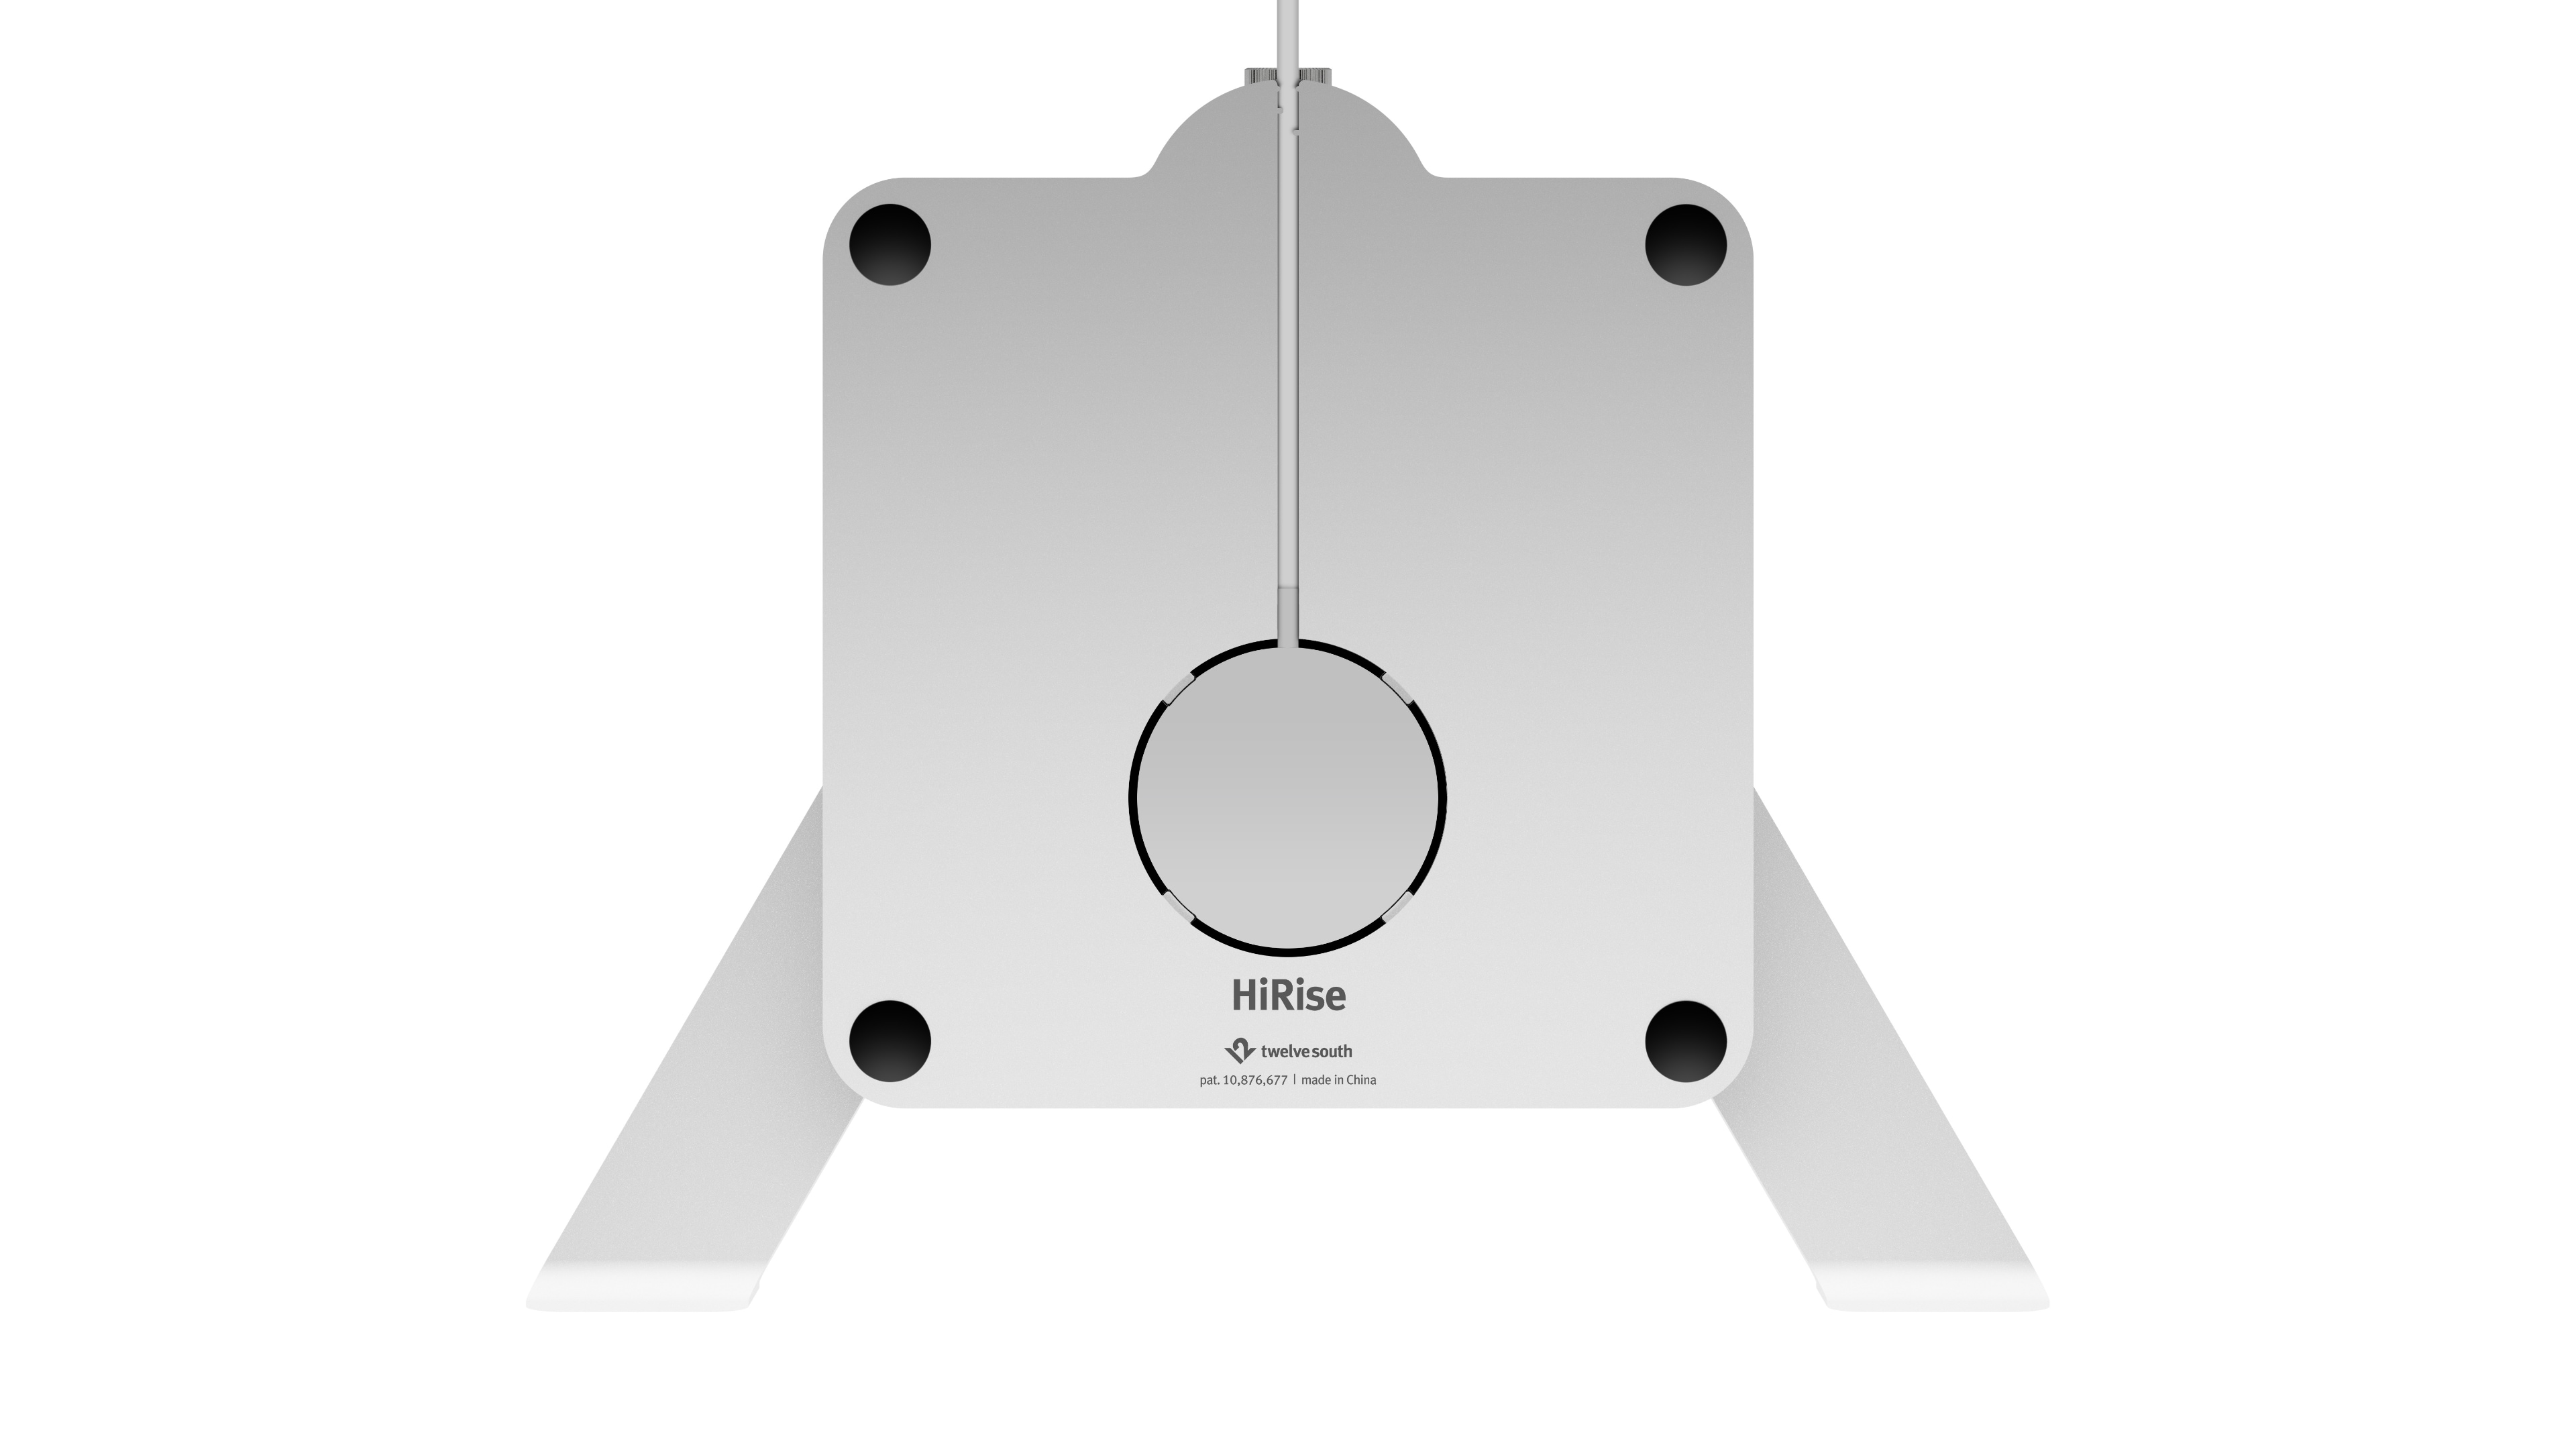 The base of Twelve South's HiRise Pro laptop stand showing a MagSafe disc charger in a built-in compartment 